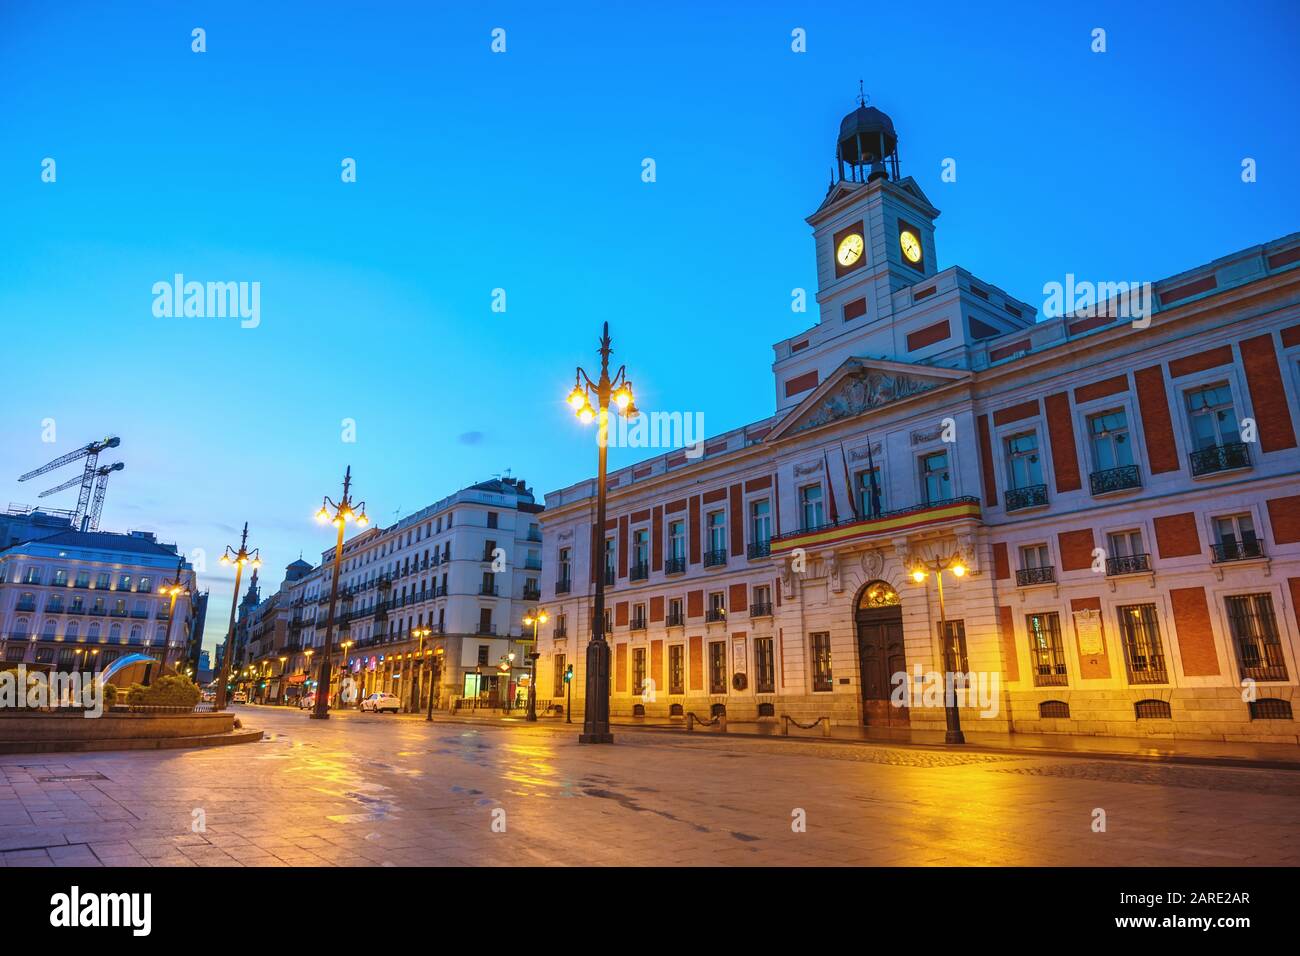 Madrid Spain, night city skyline at Puerta del Sol and Clock Tower of Sun Gate Stock Photo